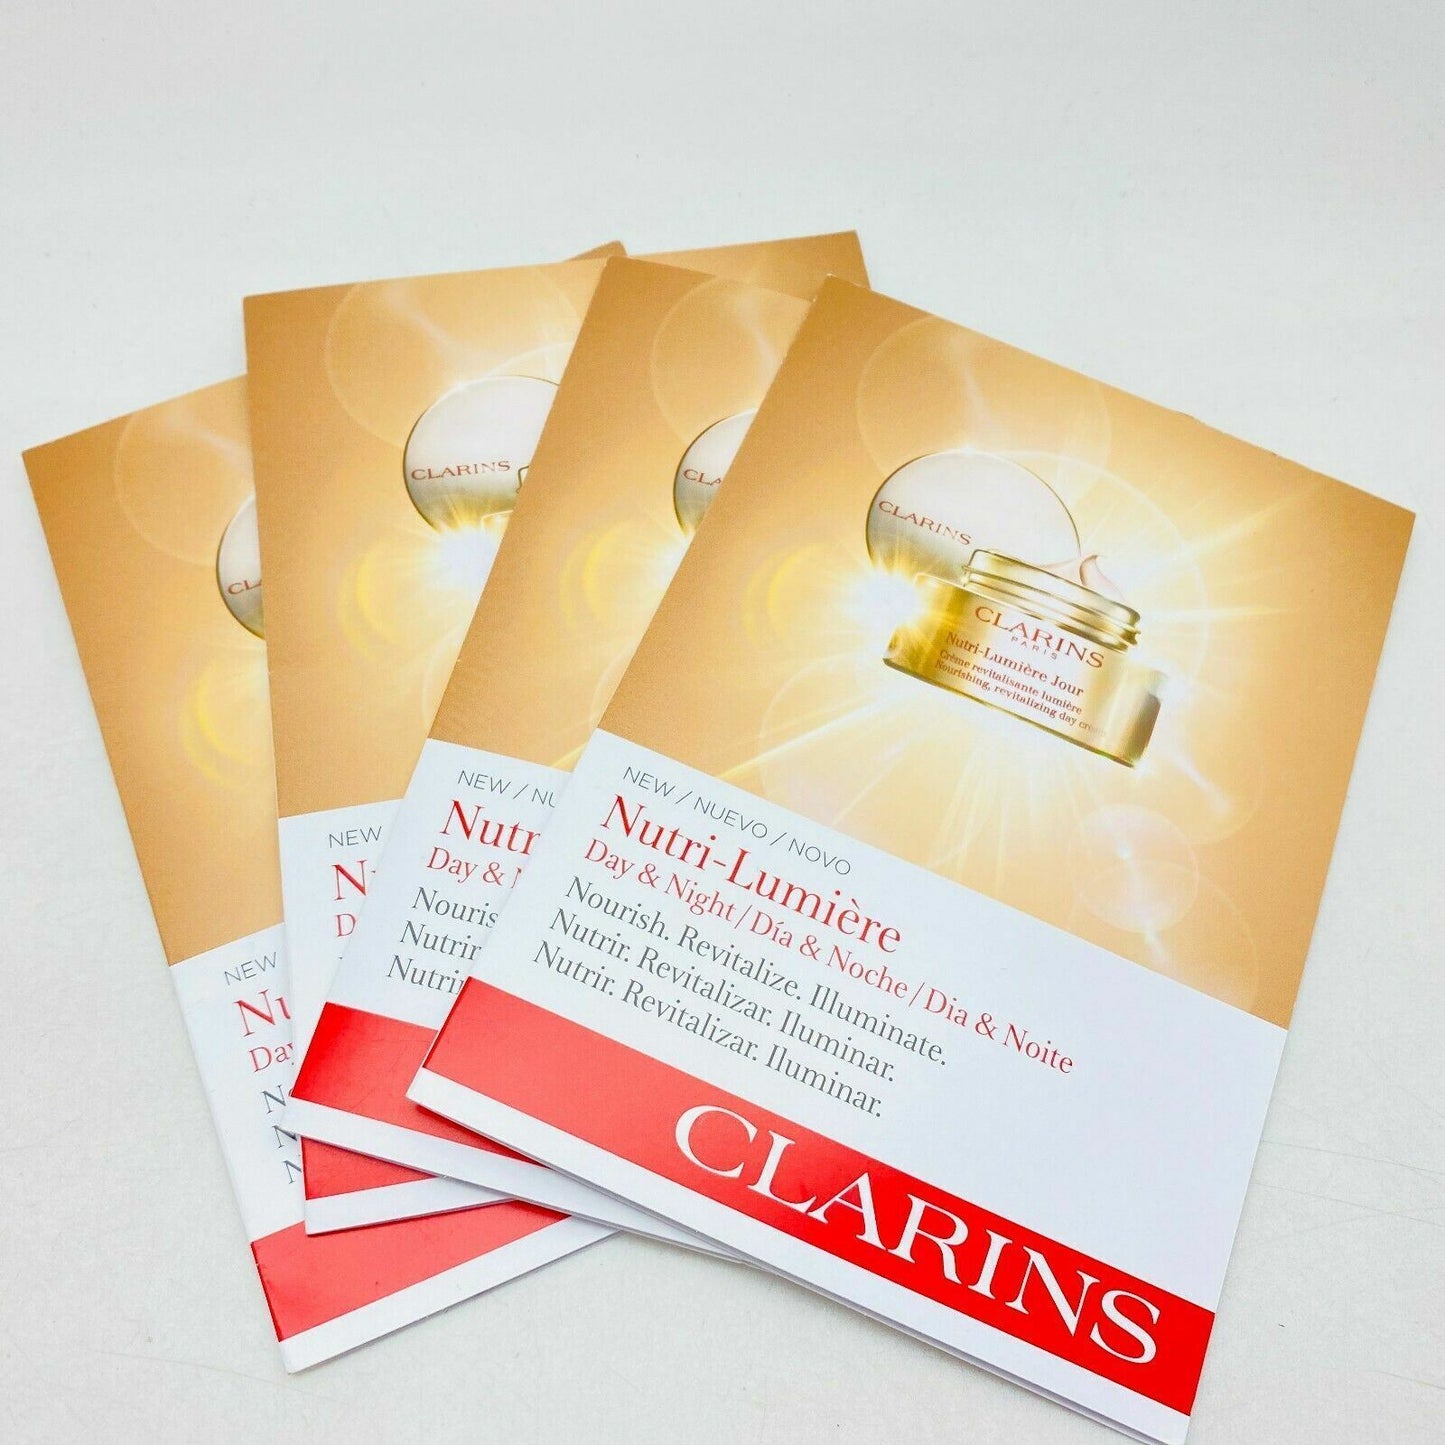 Clarins Day & Night Nutri - lumiere Revitalizing Cream - (LOT OF 4) - NEW